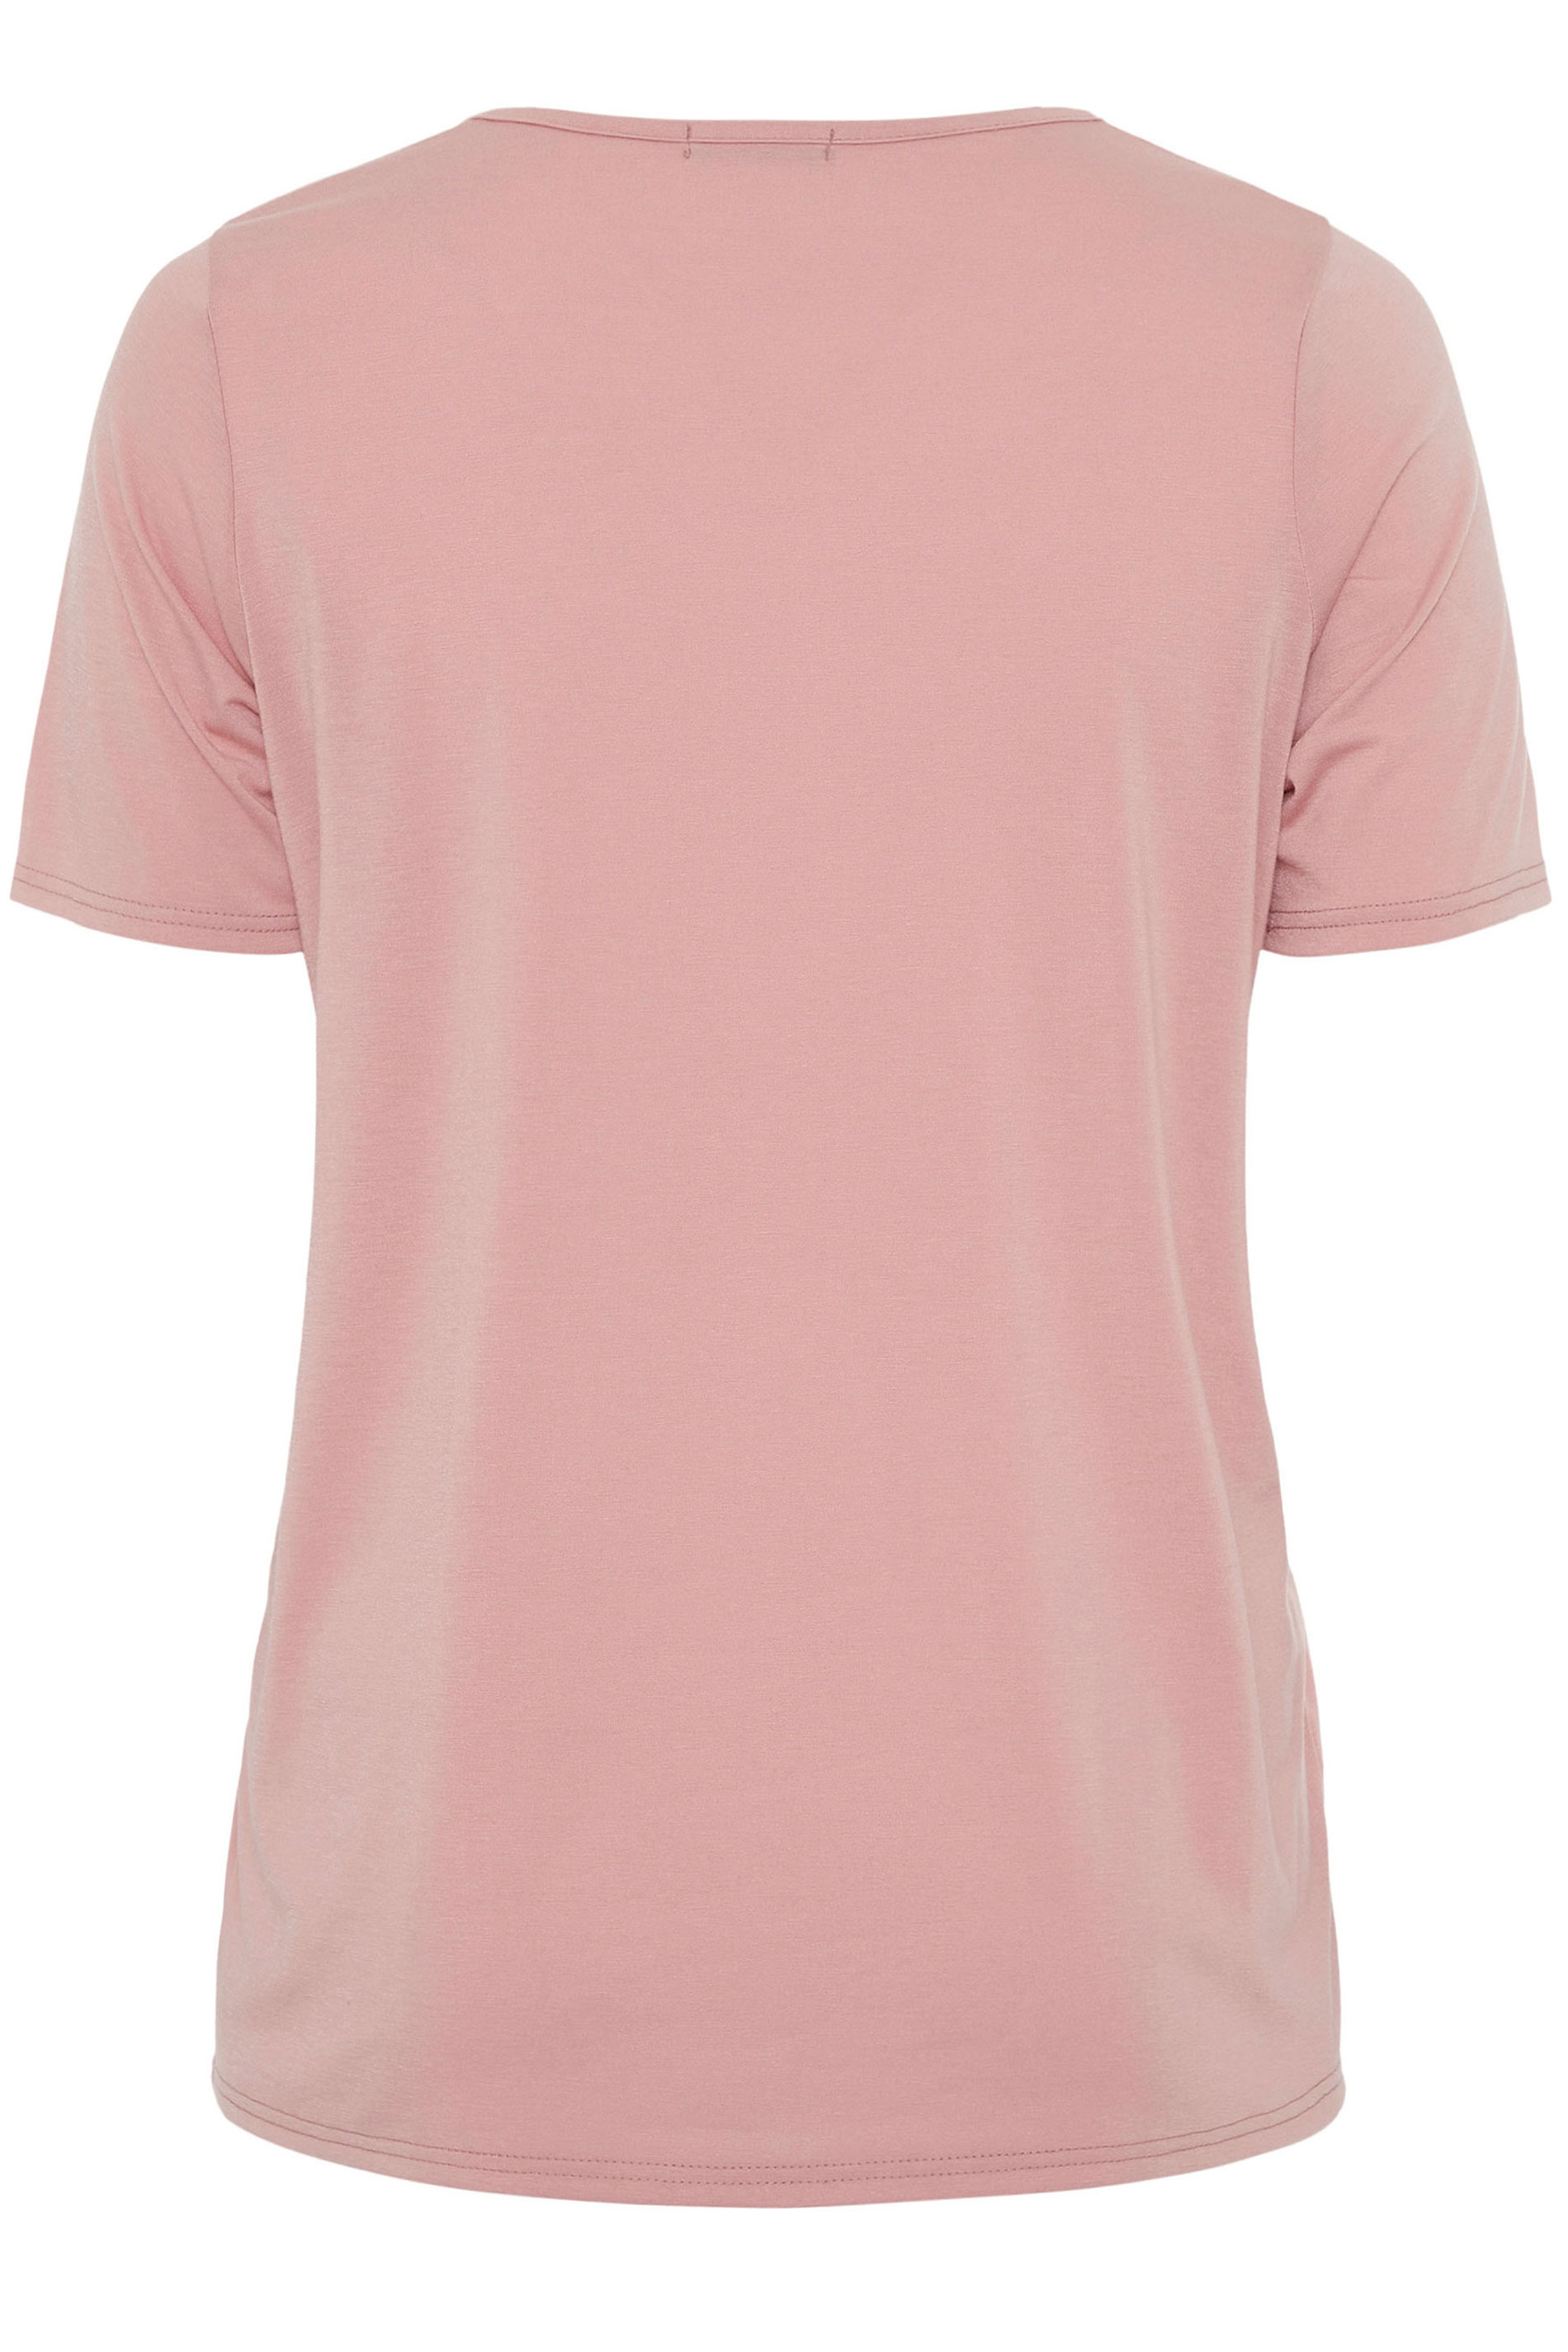 LIMITED COLLECTION Blush Pink Heart Print T-Shirt | Yours Clothing